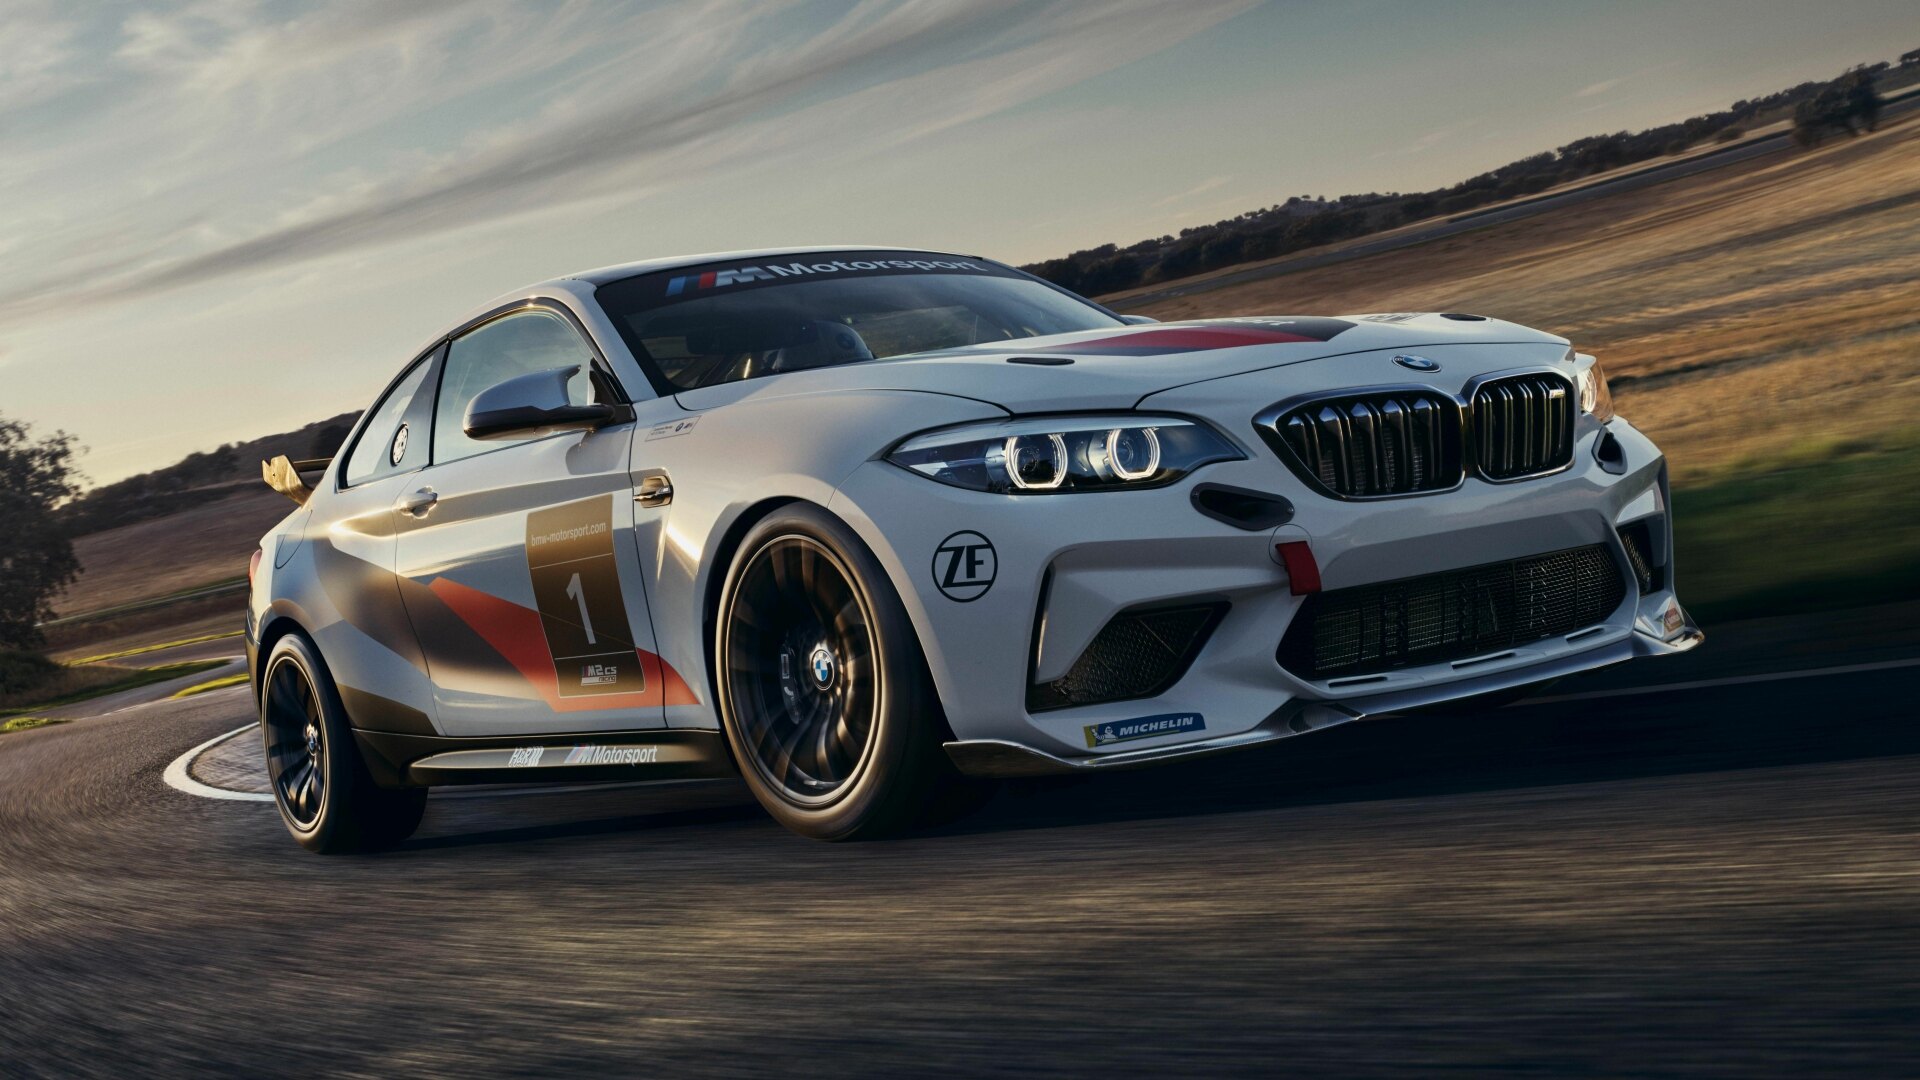 Presenting BMW M2 CS A Glimpse Into The Future Of Performance